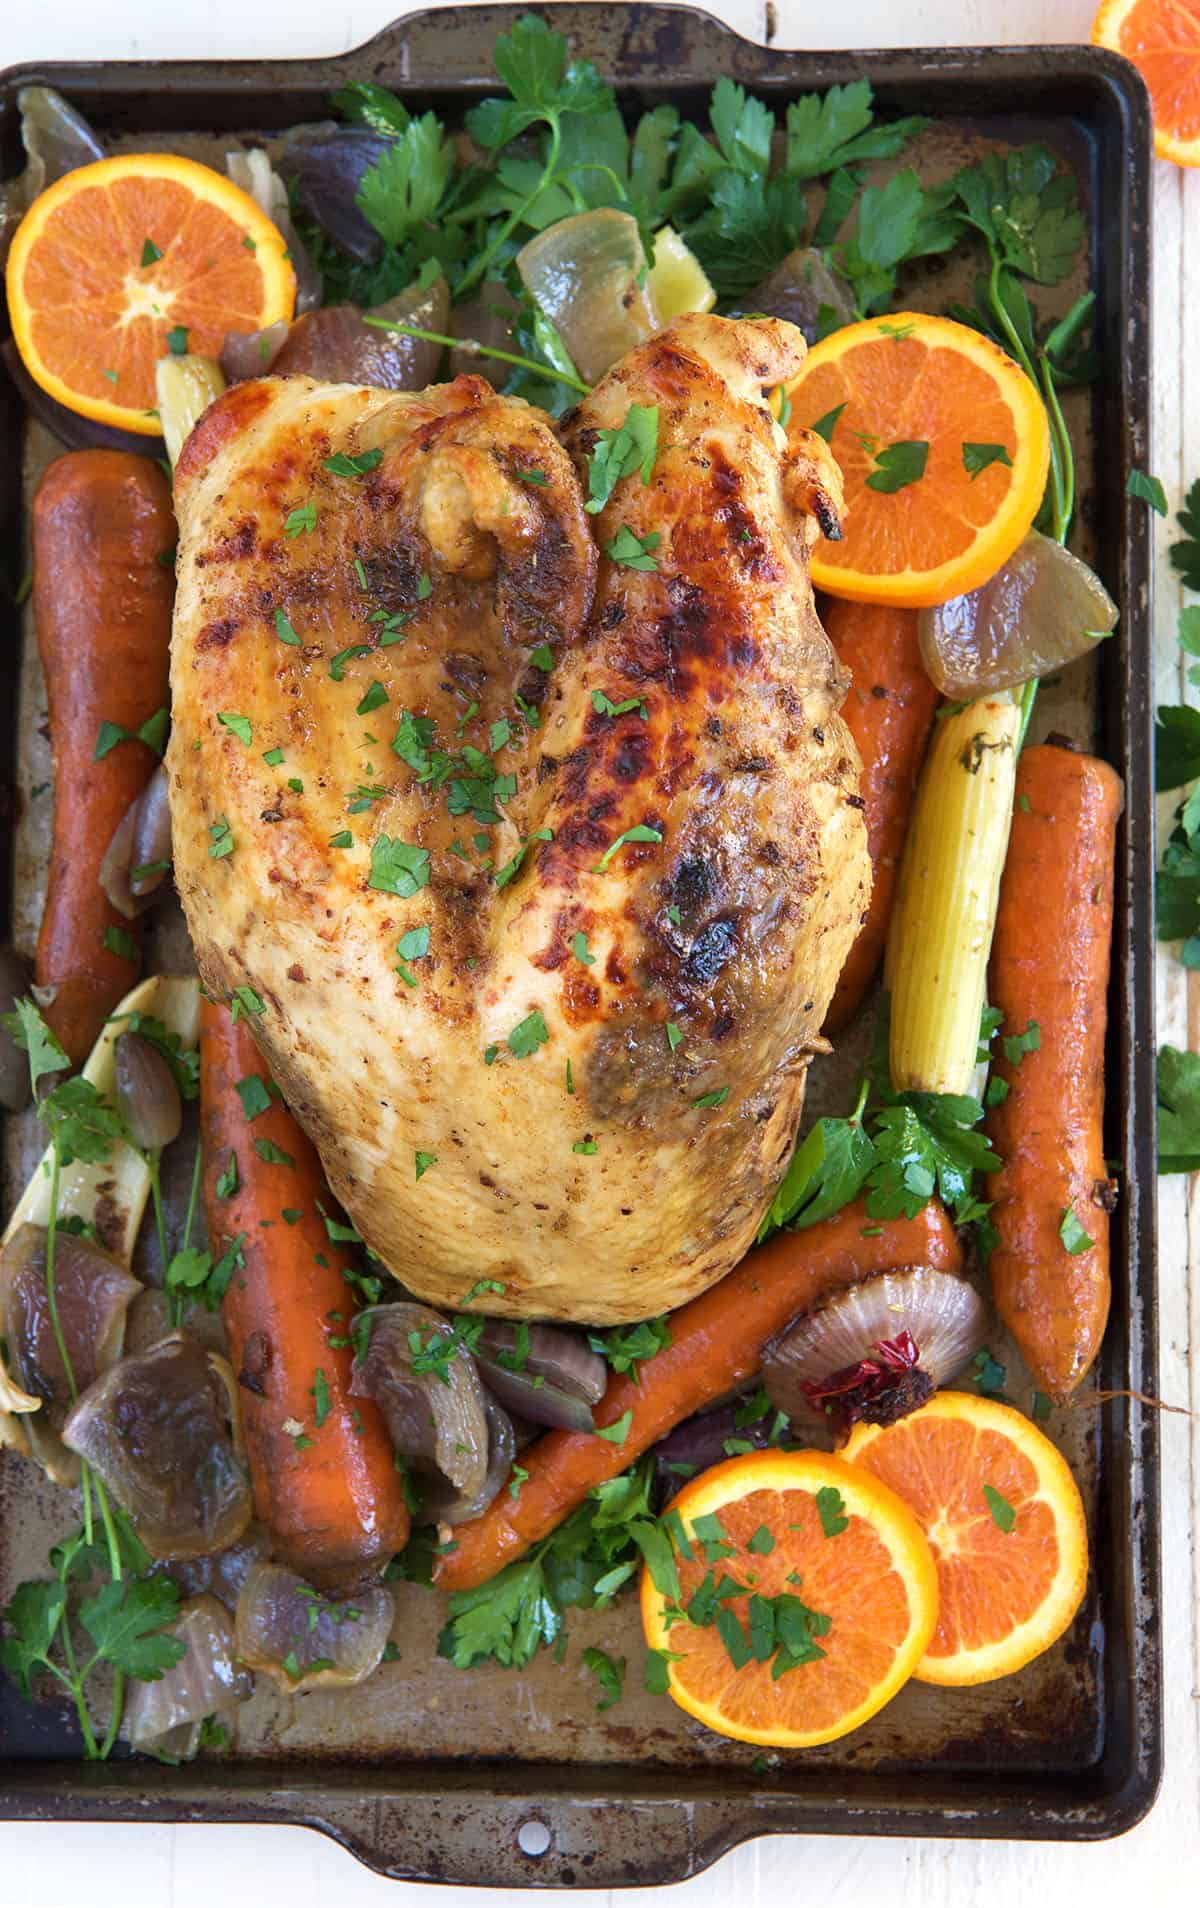 A cooked turkey breast is placed on a baking sheet with fruits and veggies.